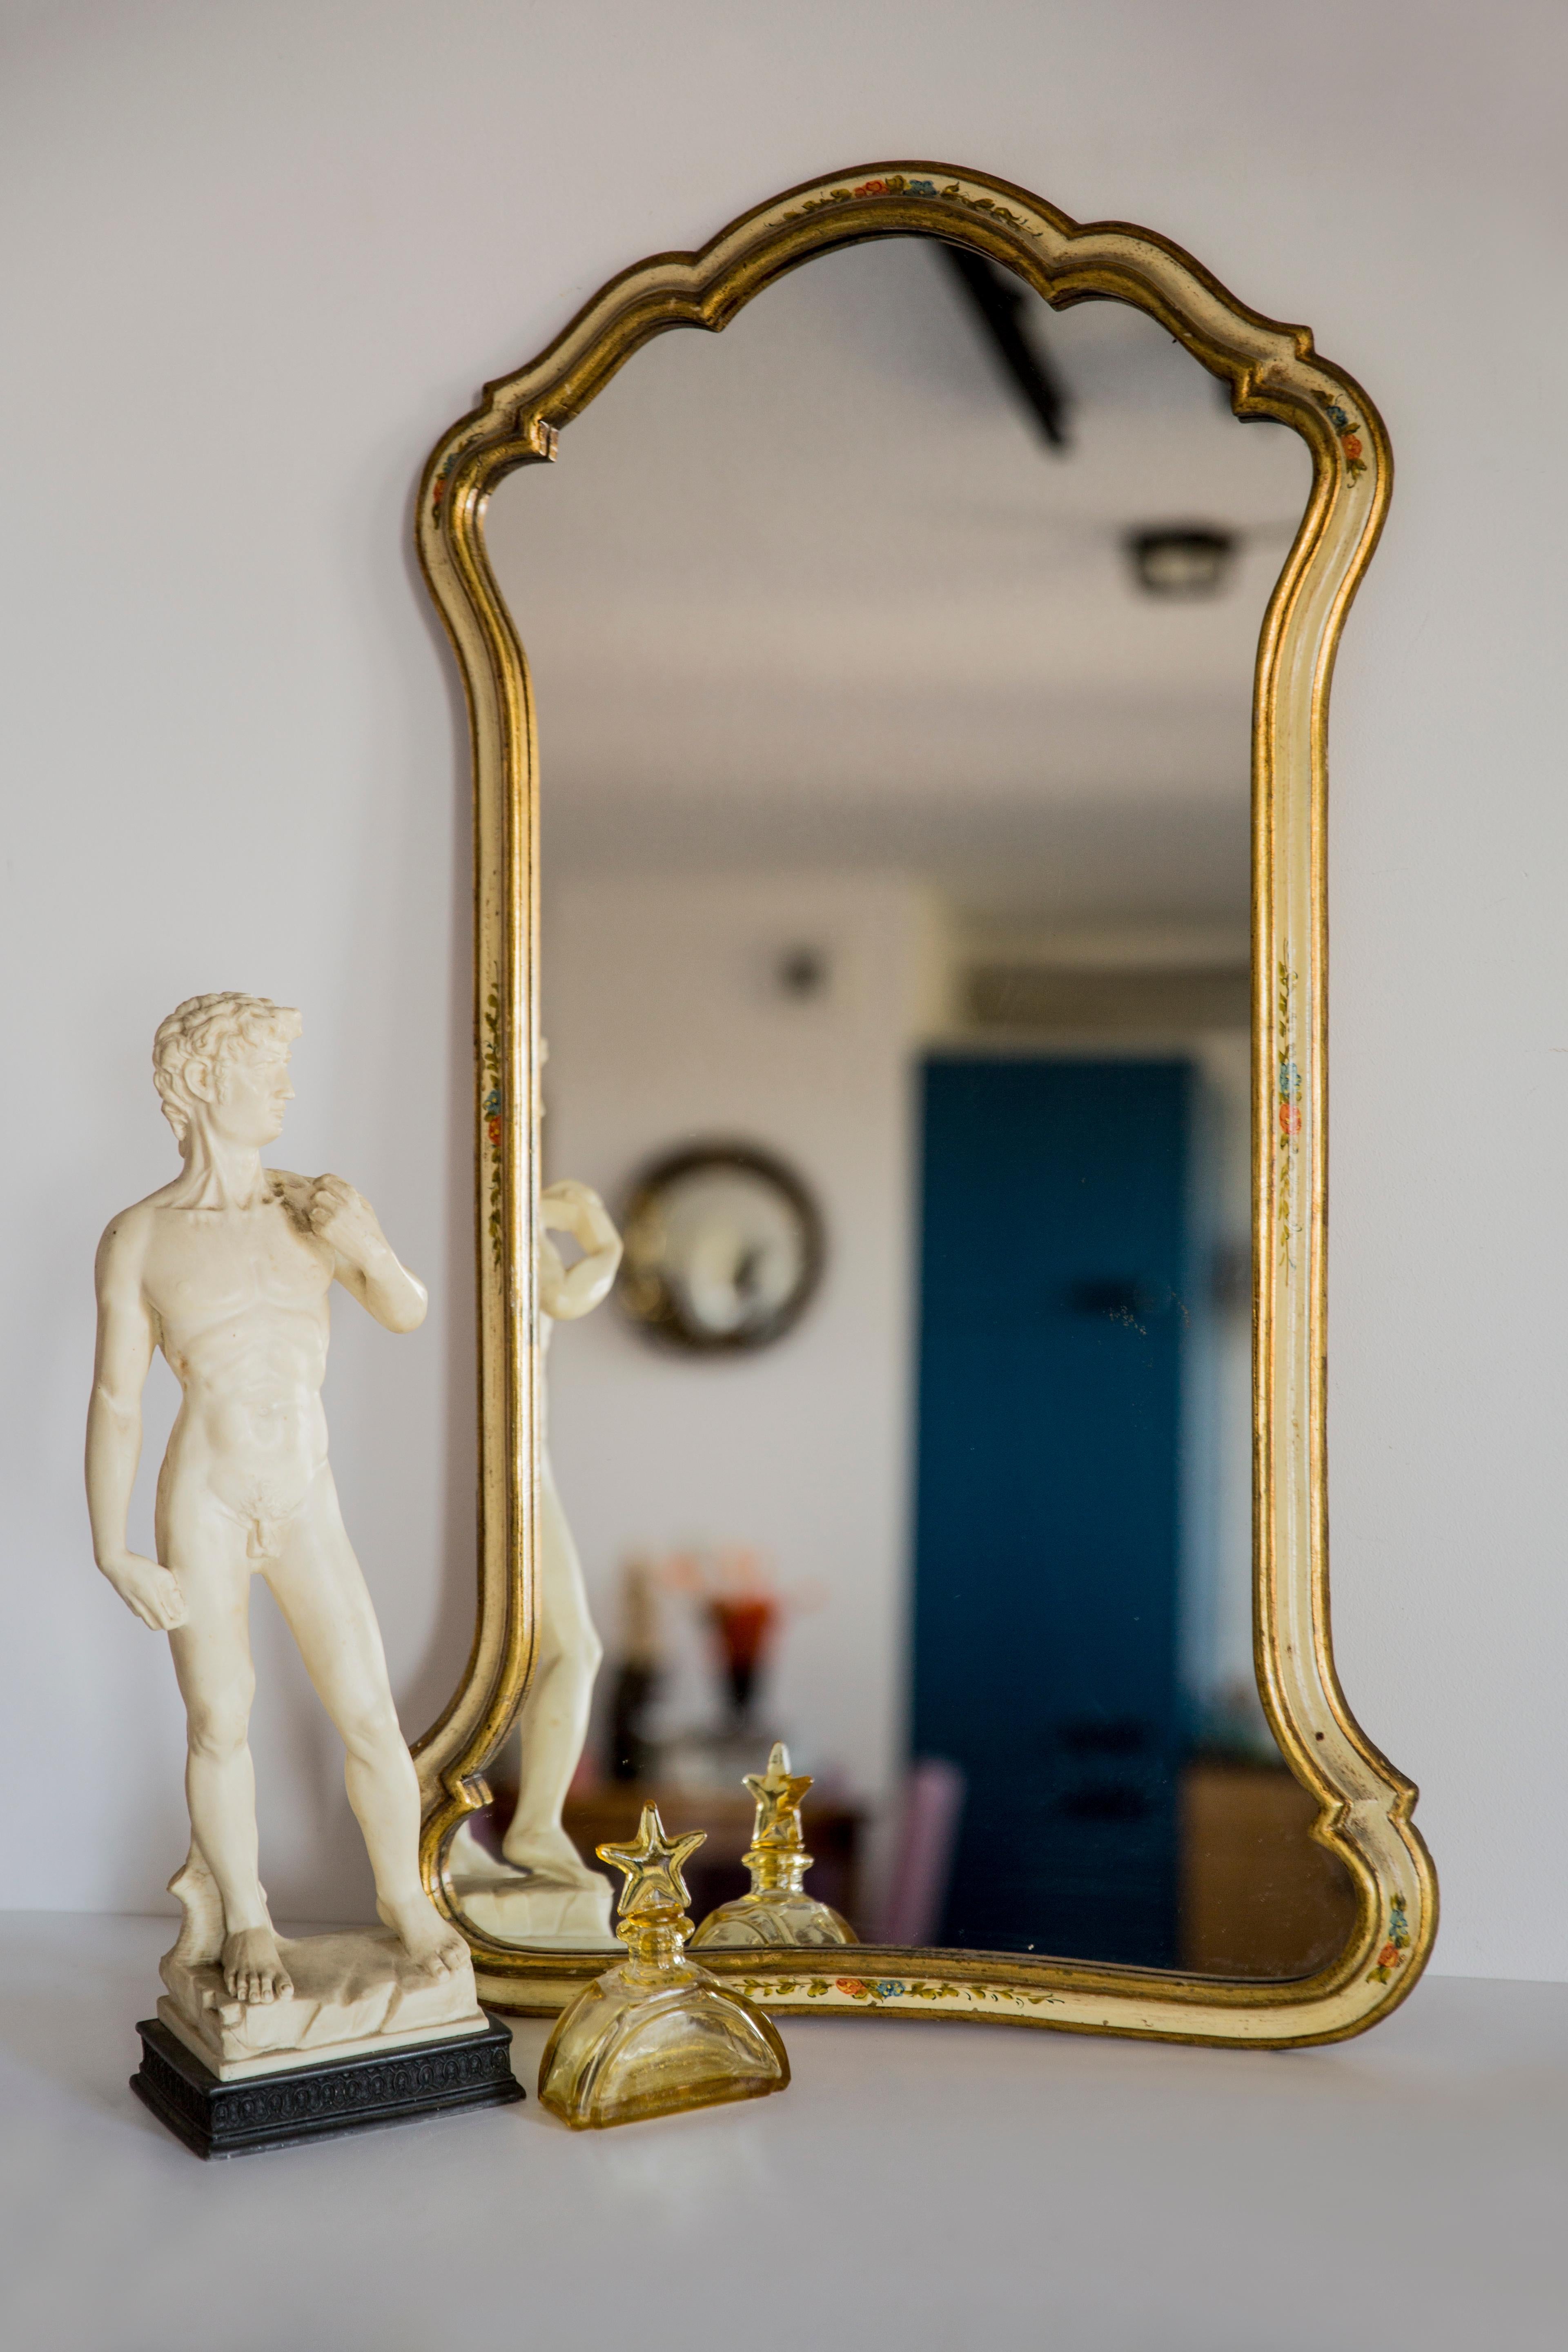 Beautiful mirror in a decorative frame from Italy. The frame is made of wood. Mirror is in very good vintage condition. Original glass. Amazing patina. Beautiful piece for every interior! Only one unique piece.